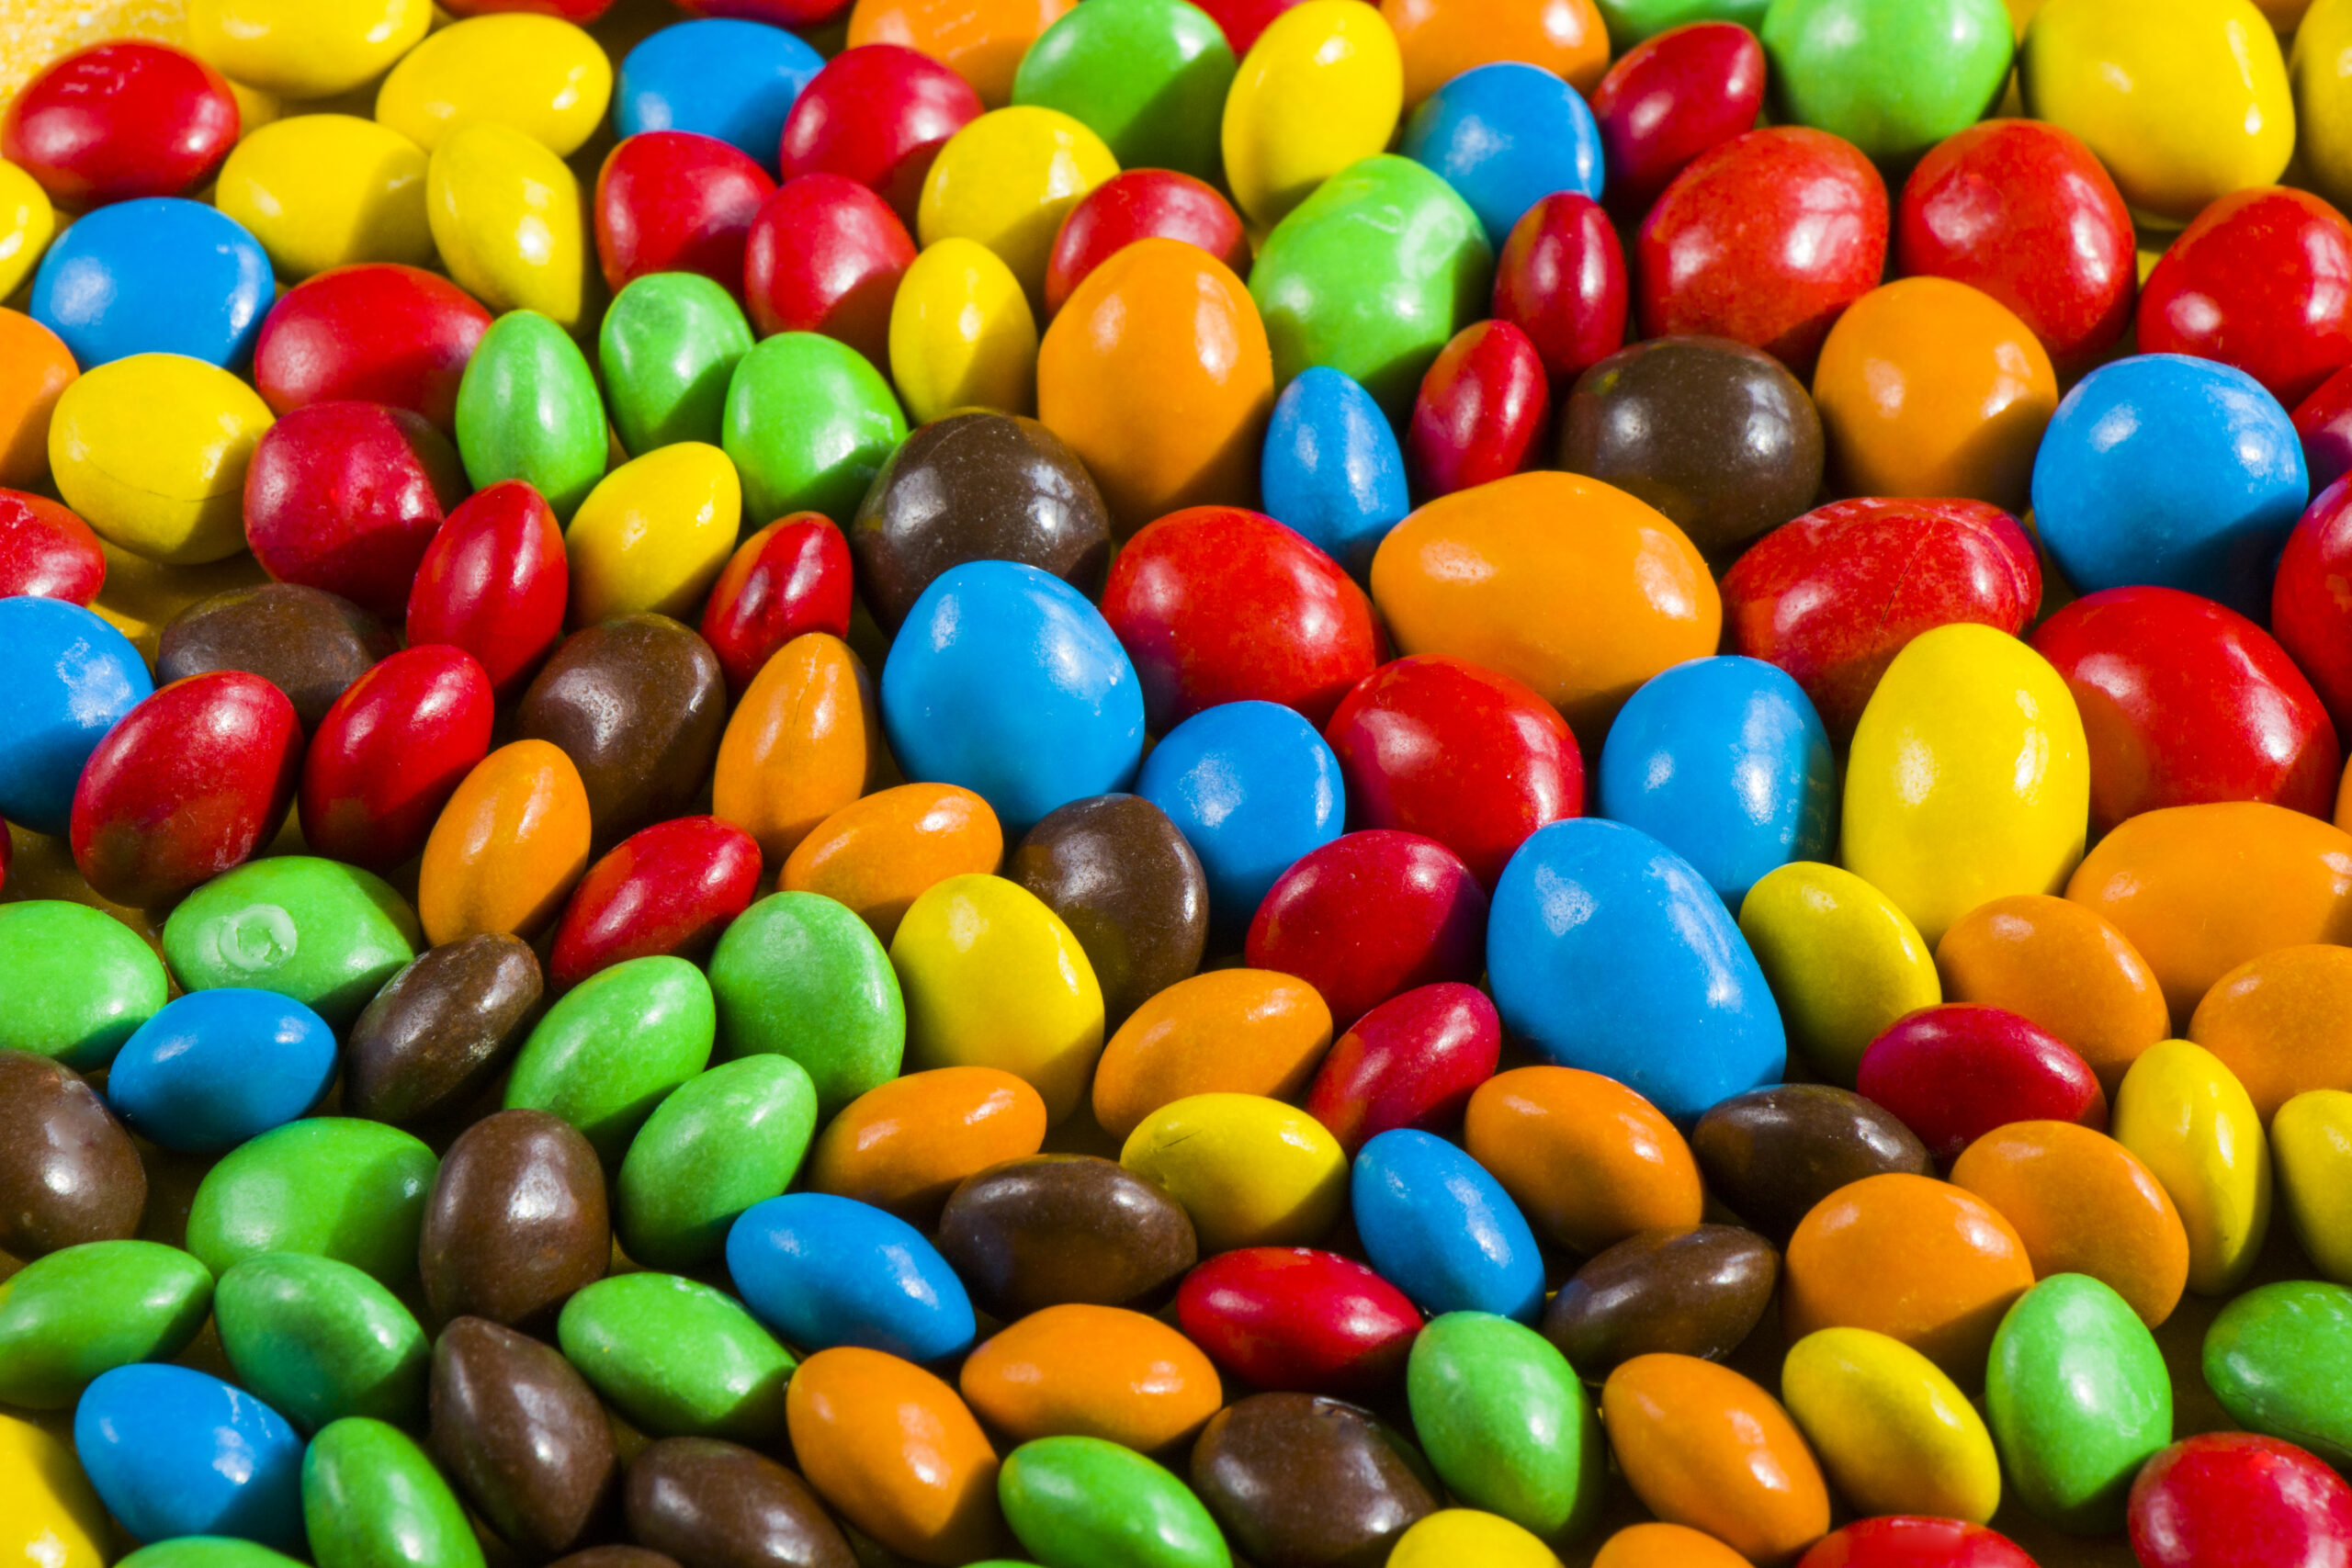 M&M's candy on the yellow background, colorful candy and multicolored gradient